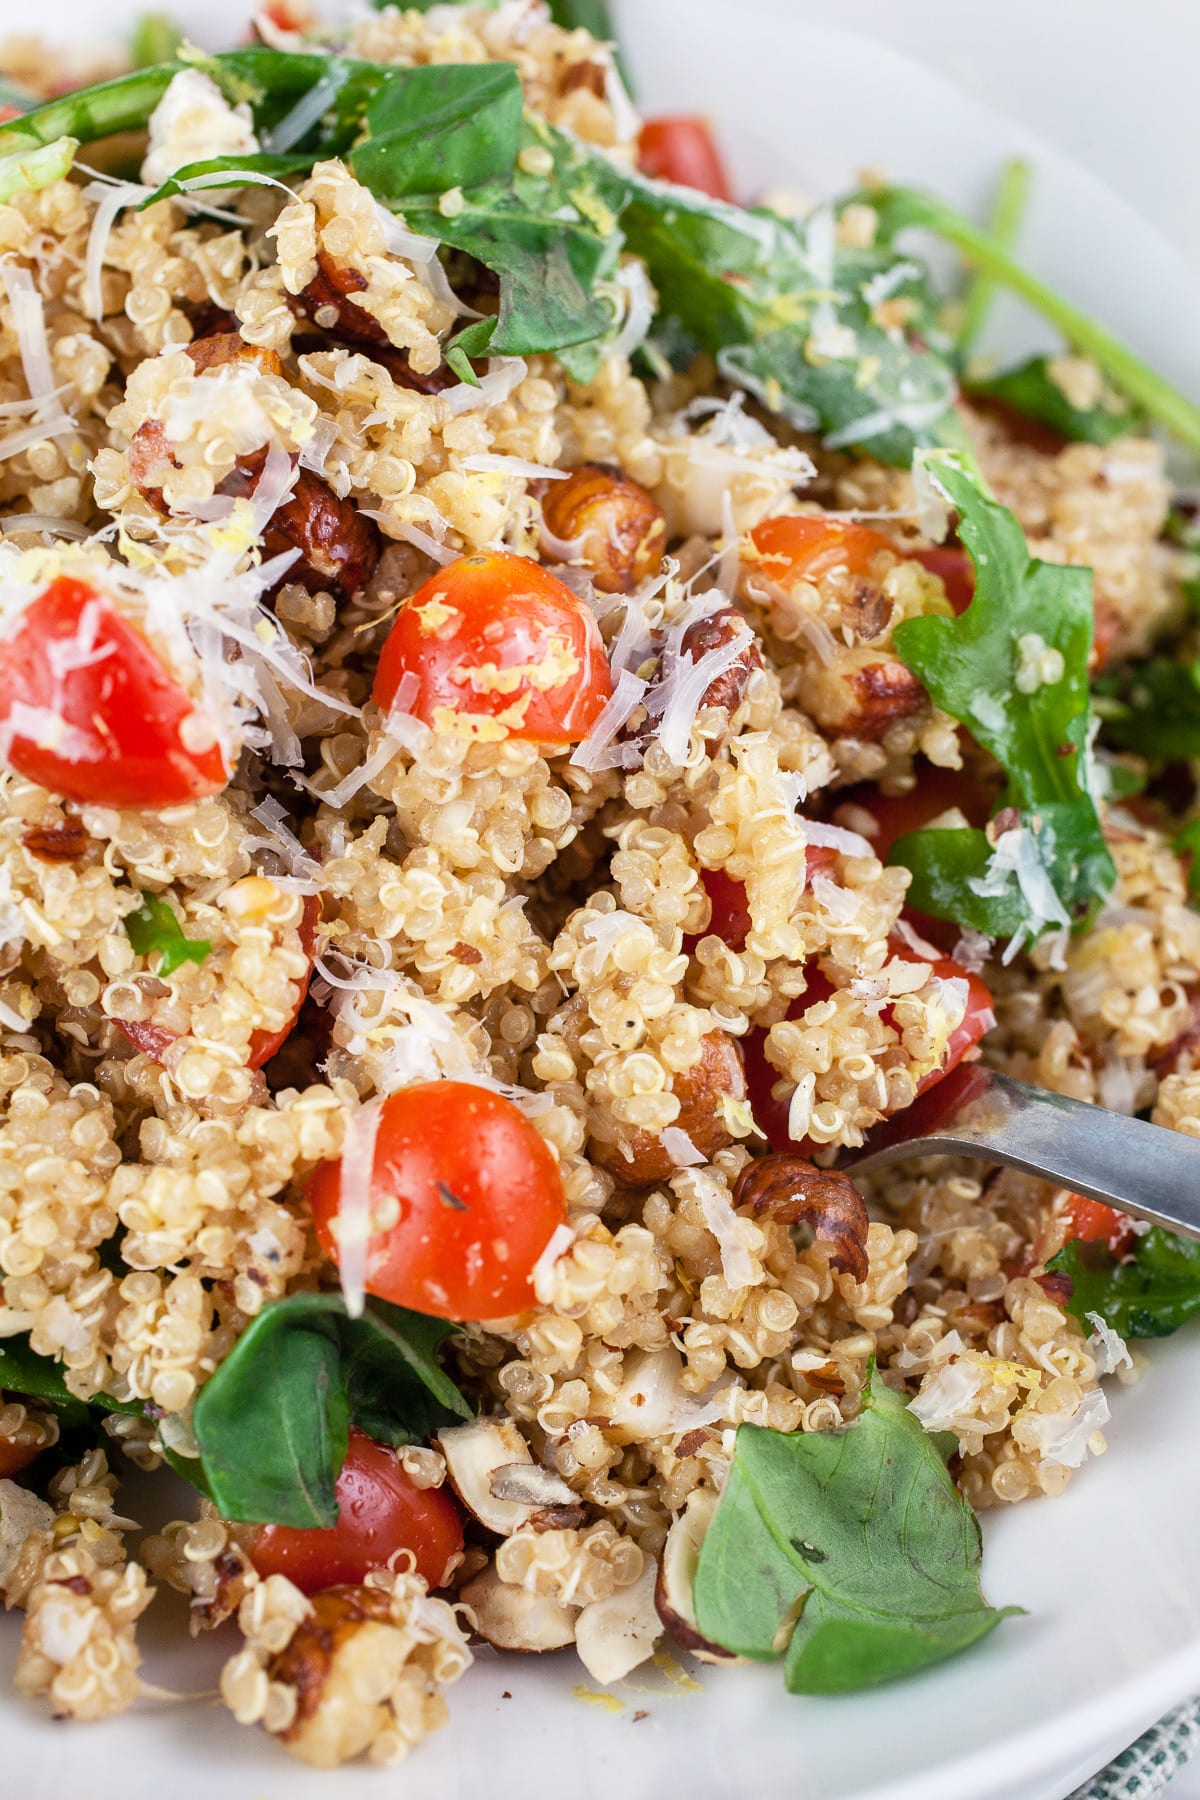 Italian quinoa salad with arugula, tomatoes, and Parmesan in white bowl.